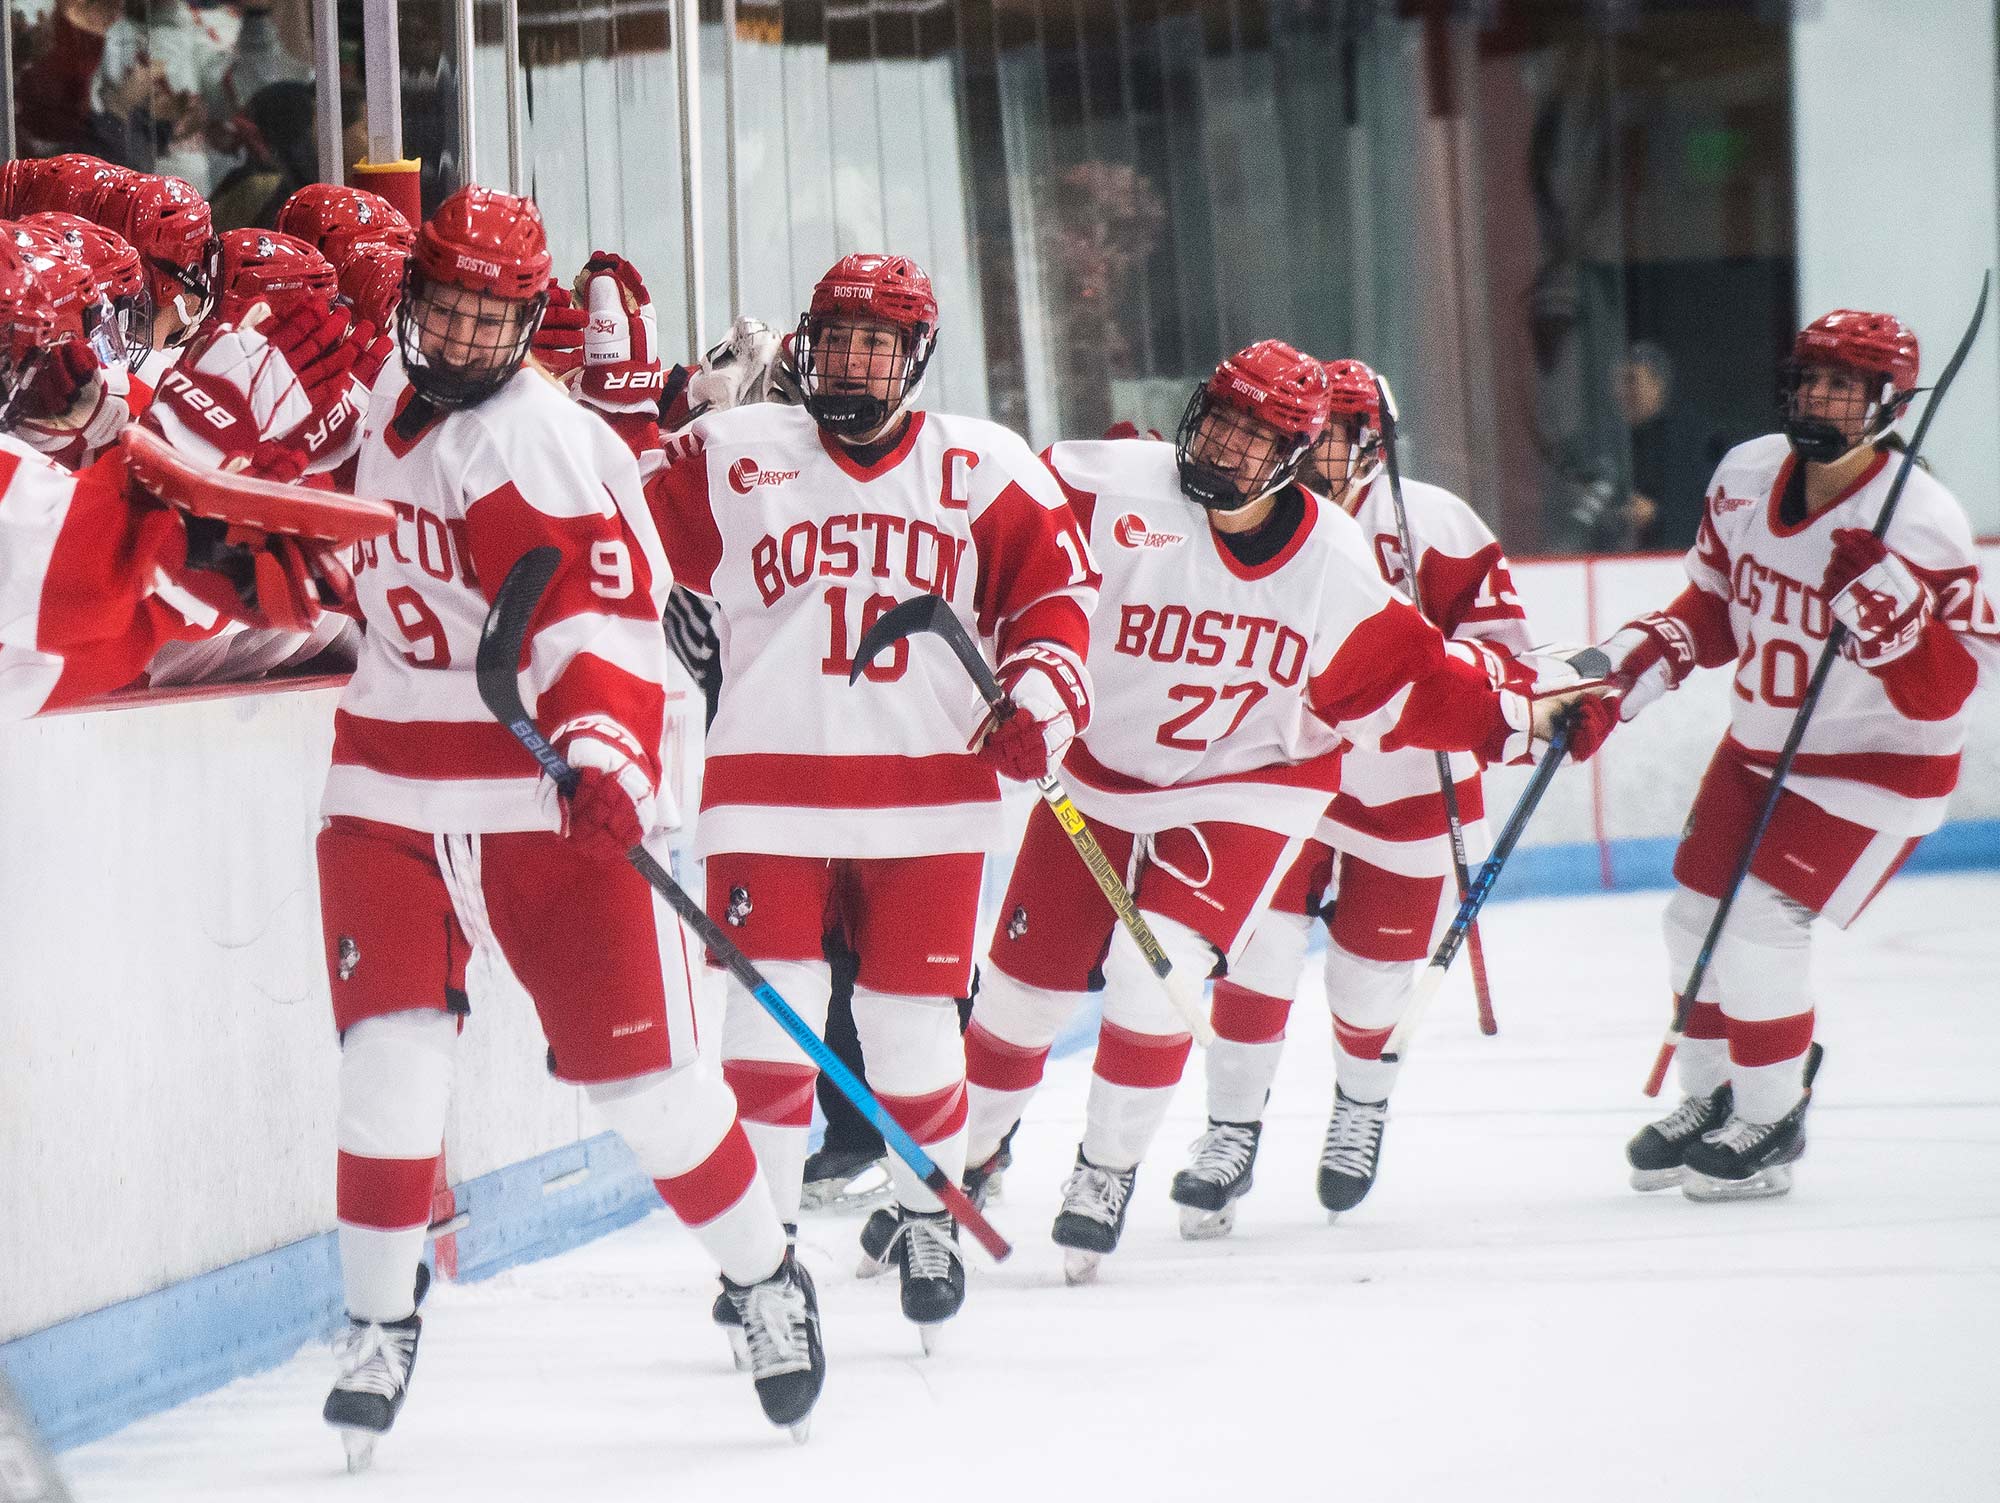 Members of BU's women's hockey team celebrate after scoring a goal in the first quarter against Boston College during the Women’s Beanpot tournament on Tuesday, February, 4, 2020